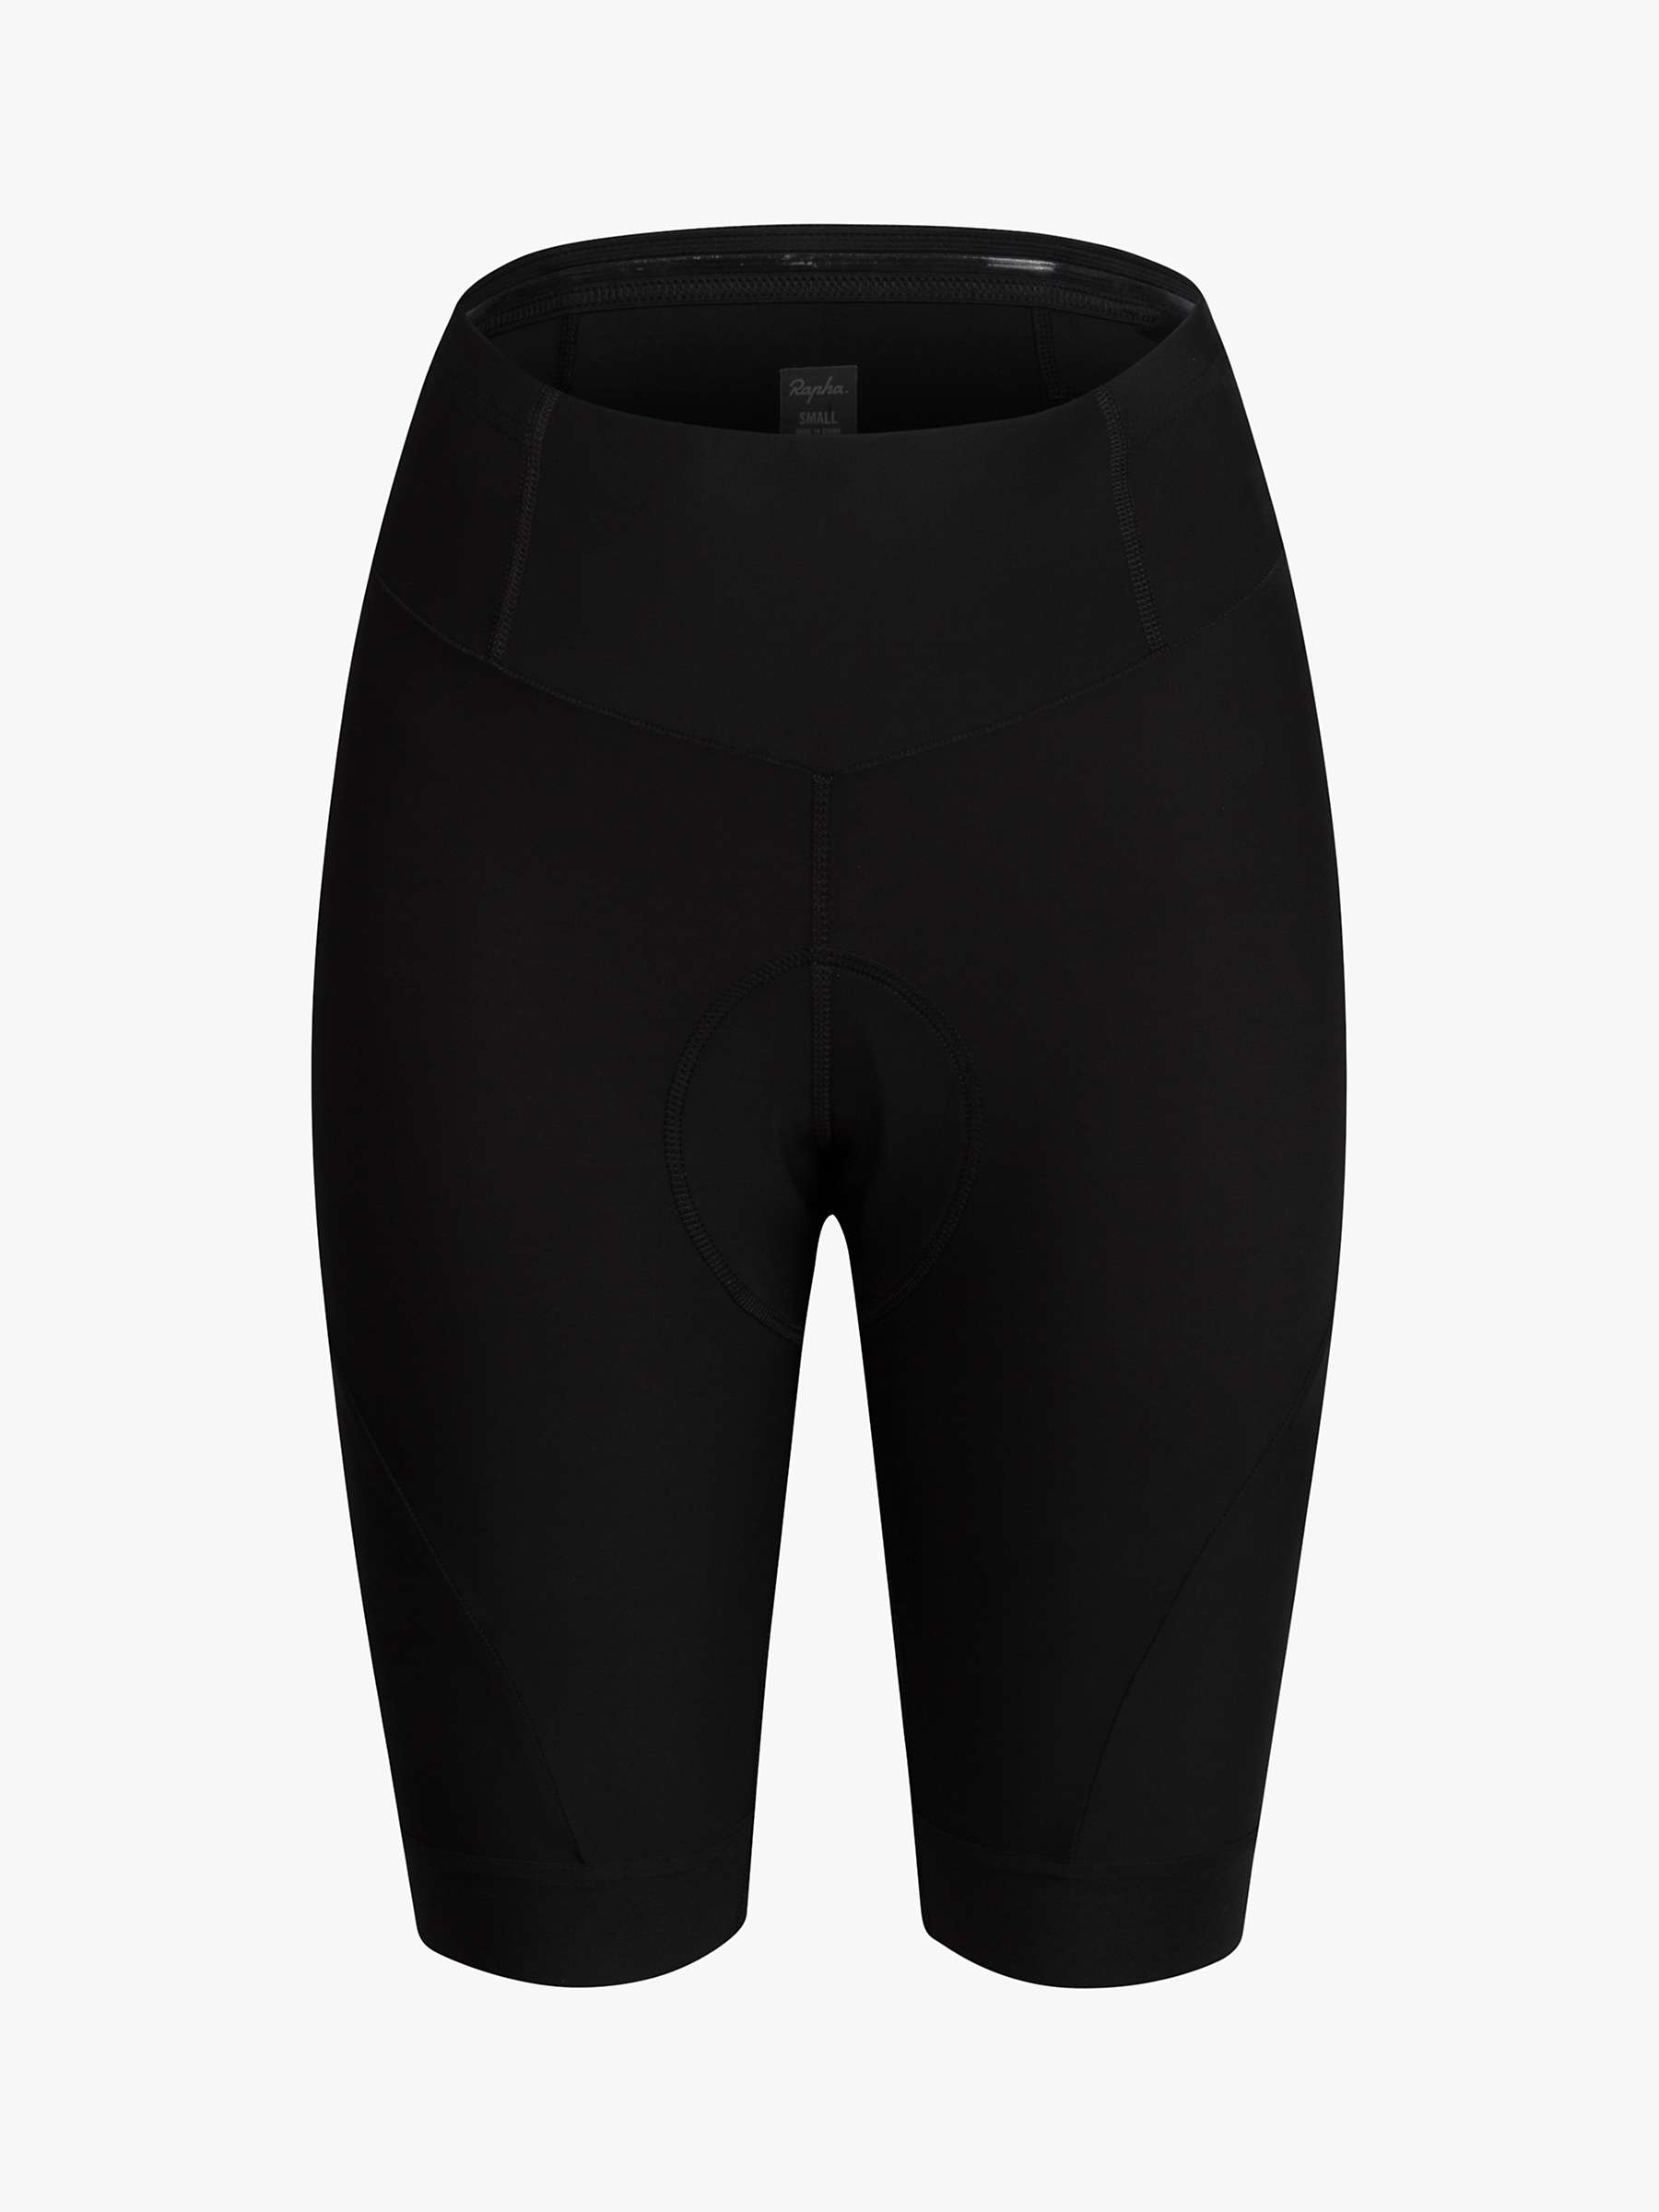 Buy Rapha Core Cycling Shorts Online at johnlewis.com